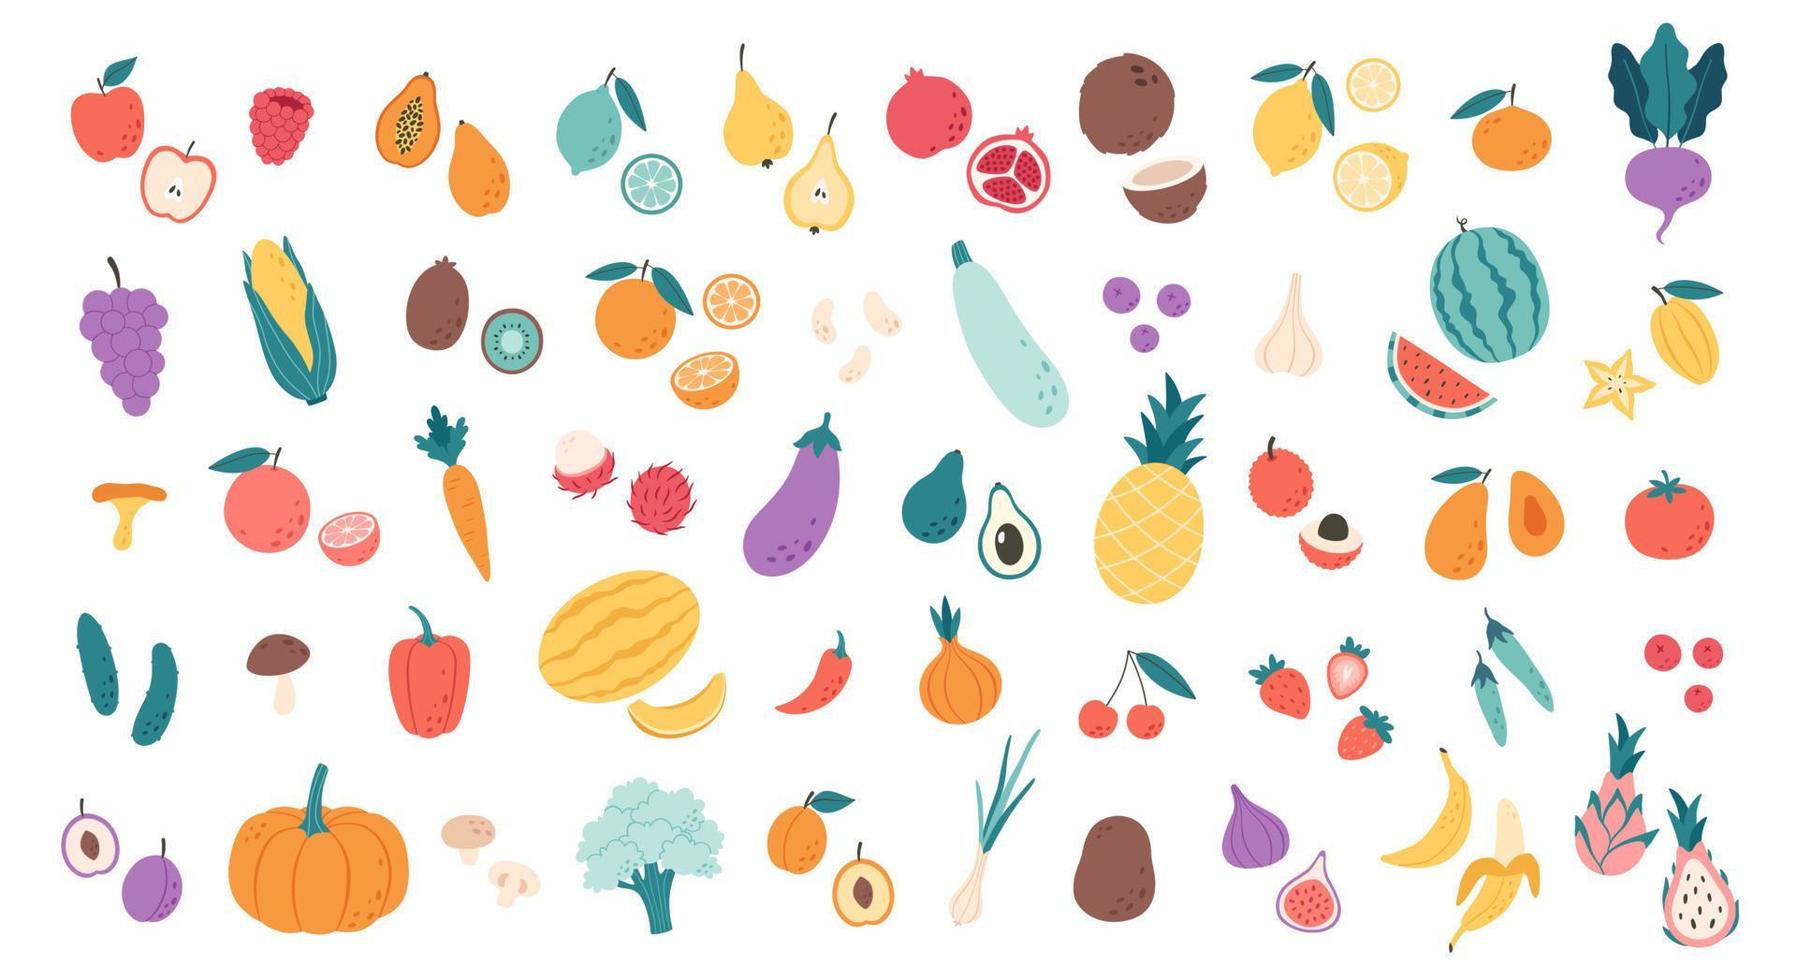 Big set of fruits, vegetables, berries, mushrooms, beans, tropical and exotic fruits. Healthy food, dietetics products vector